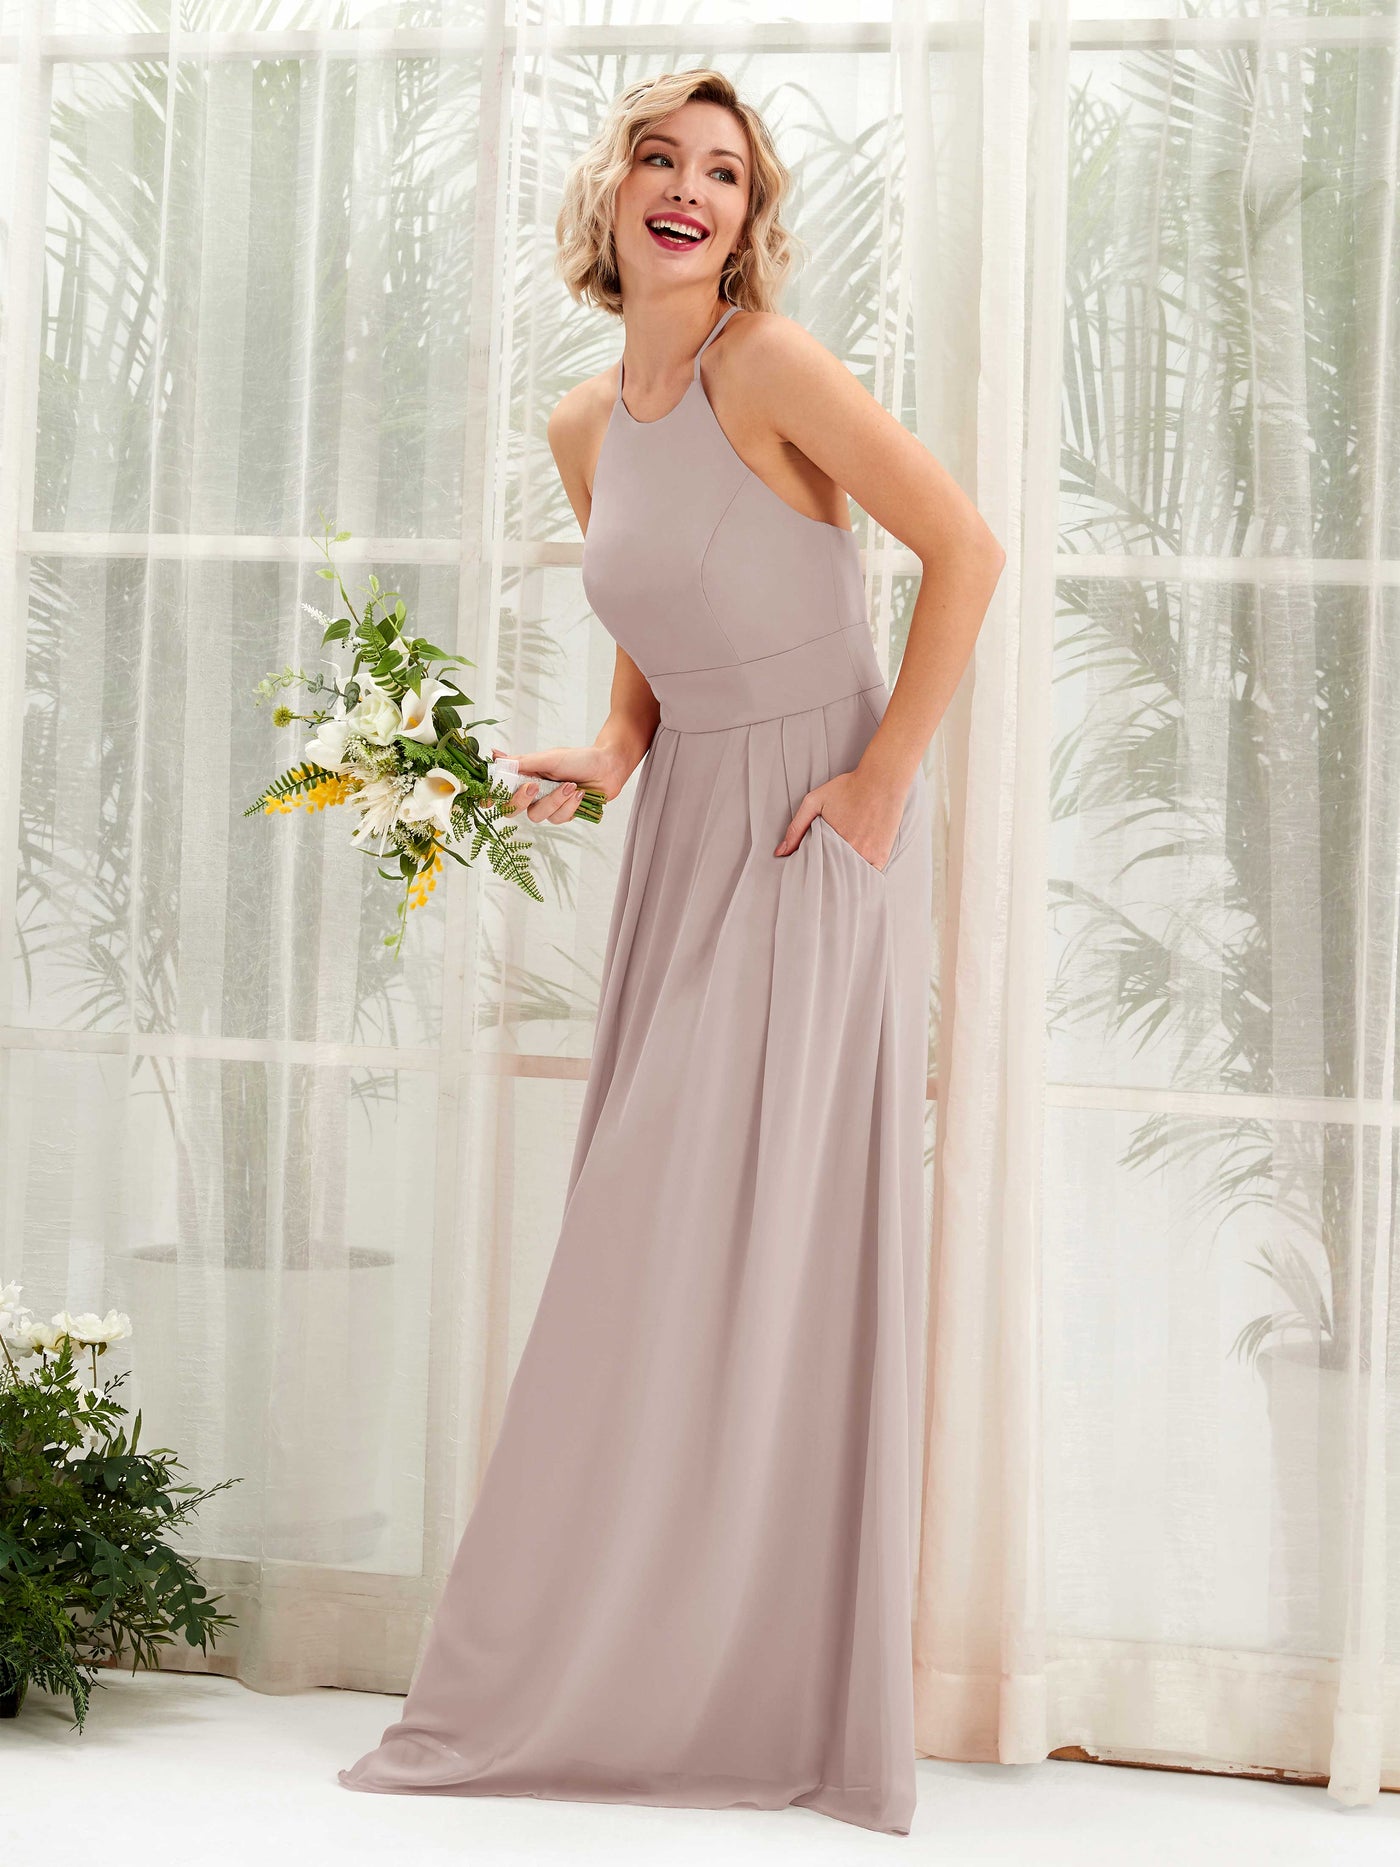 Taupe Bridesmaid Dresses Bridesmaid Dress A-line Chiffon Halter Full Length Sleeveless Wedding Party Dress (81225224)#color_taupe